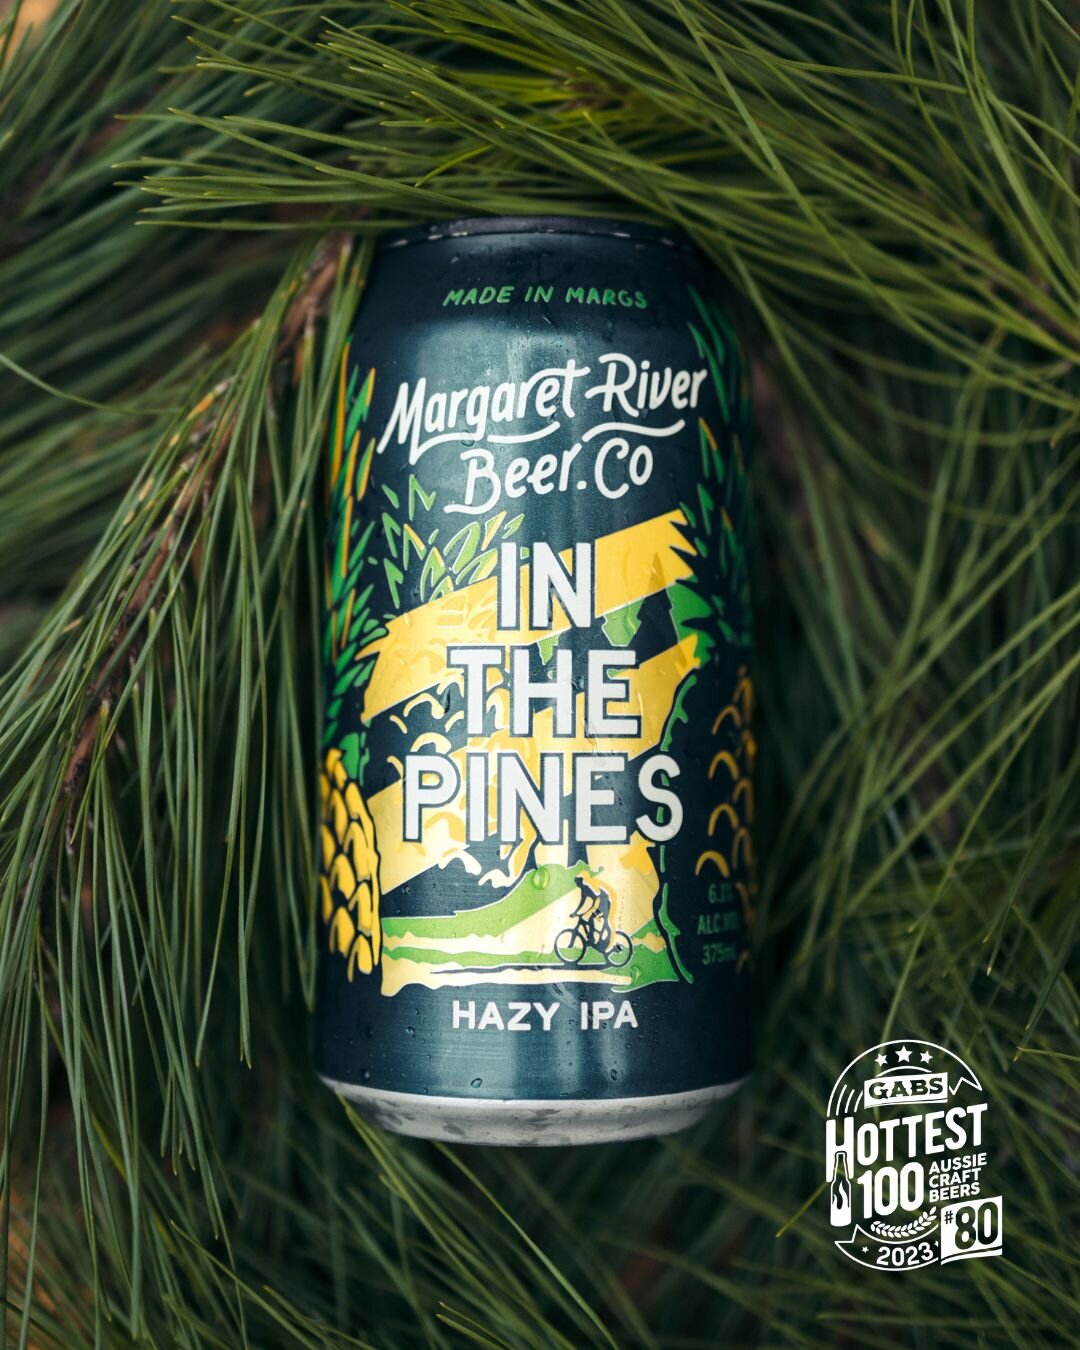 Voted in #80 in the @gabsfestival 🍍💯⁠
⁠
We are stoked you legends put 'In the Pines' into your top 5 craft beer choices in the GABS HOTTEST 100 voting!⁠

Well done @margaretriverbeerco 

#GABS #aussiecraftbeer #craftbeer #hazy #hazyipa #hazybeer #D